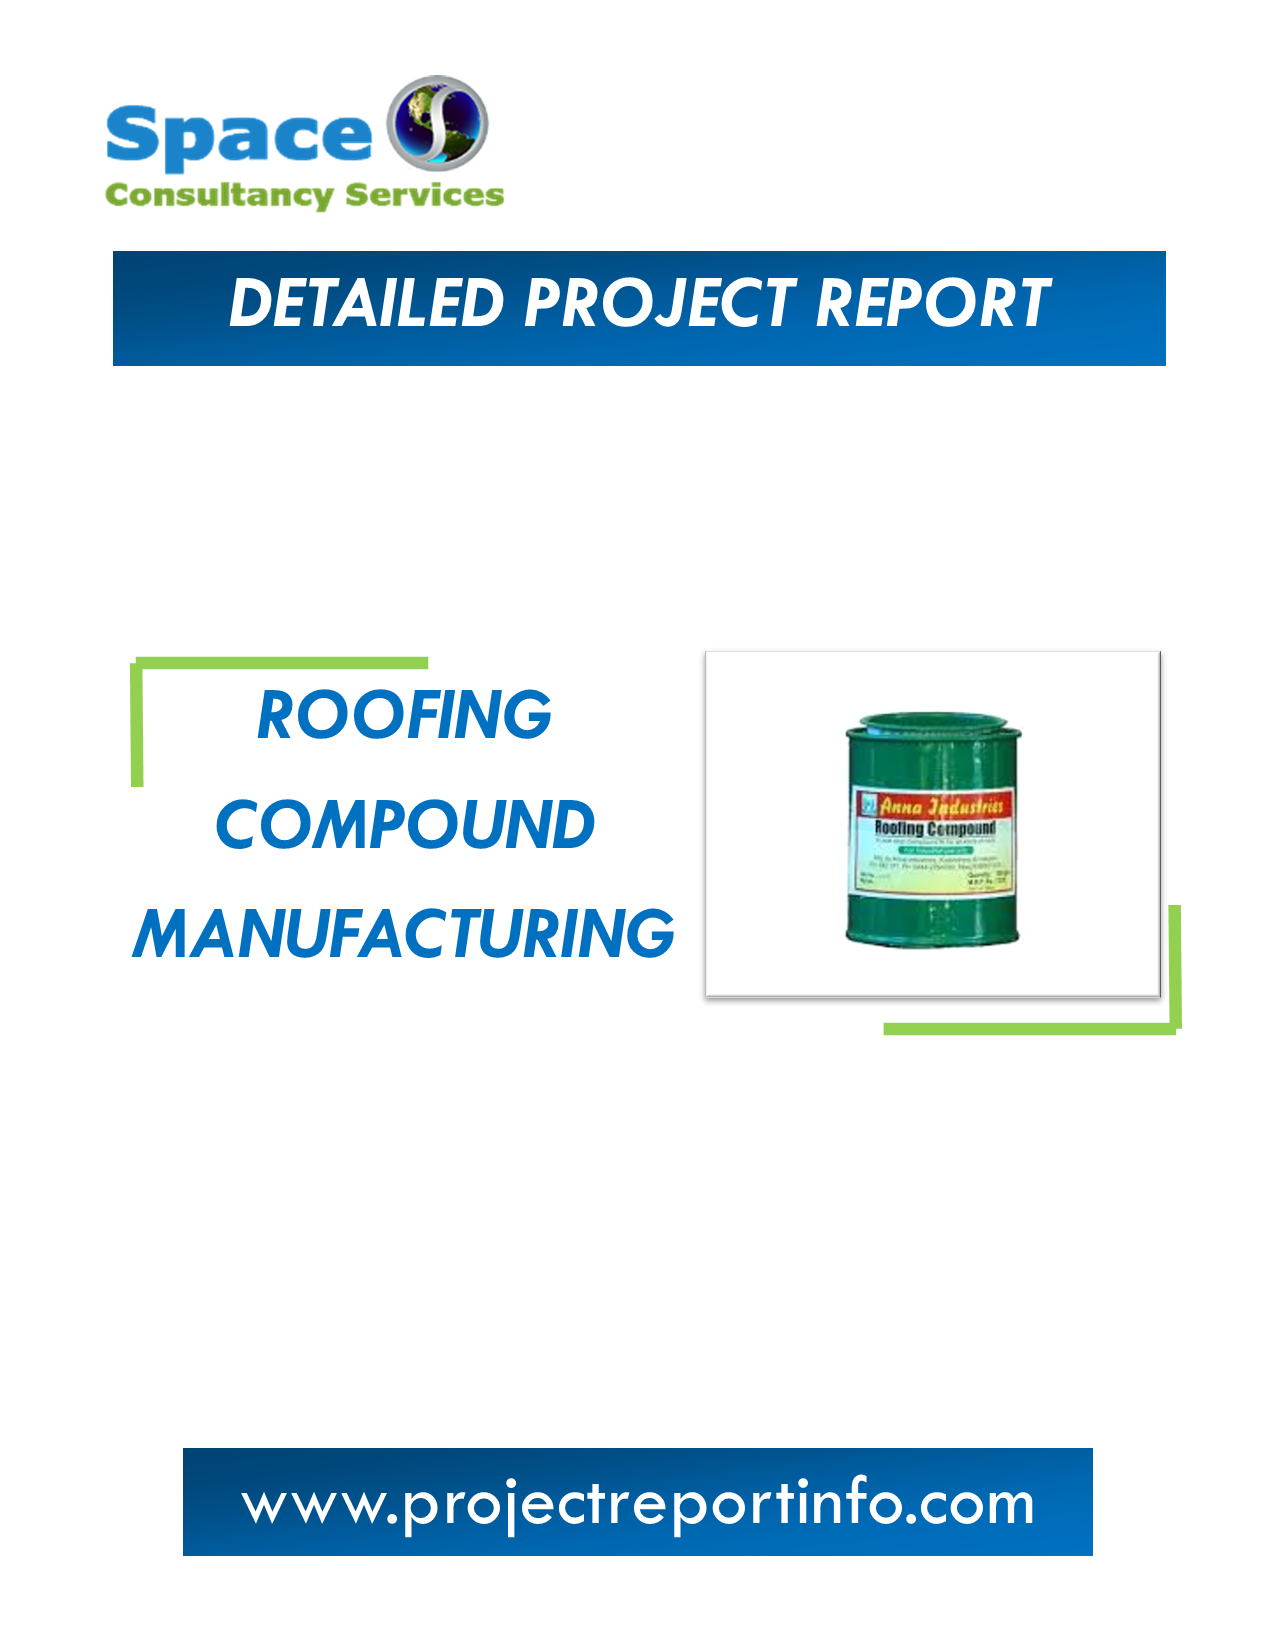 Project Report on Roofing Compound Manufacturing